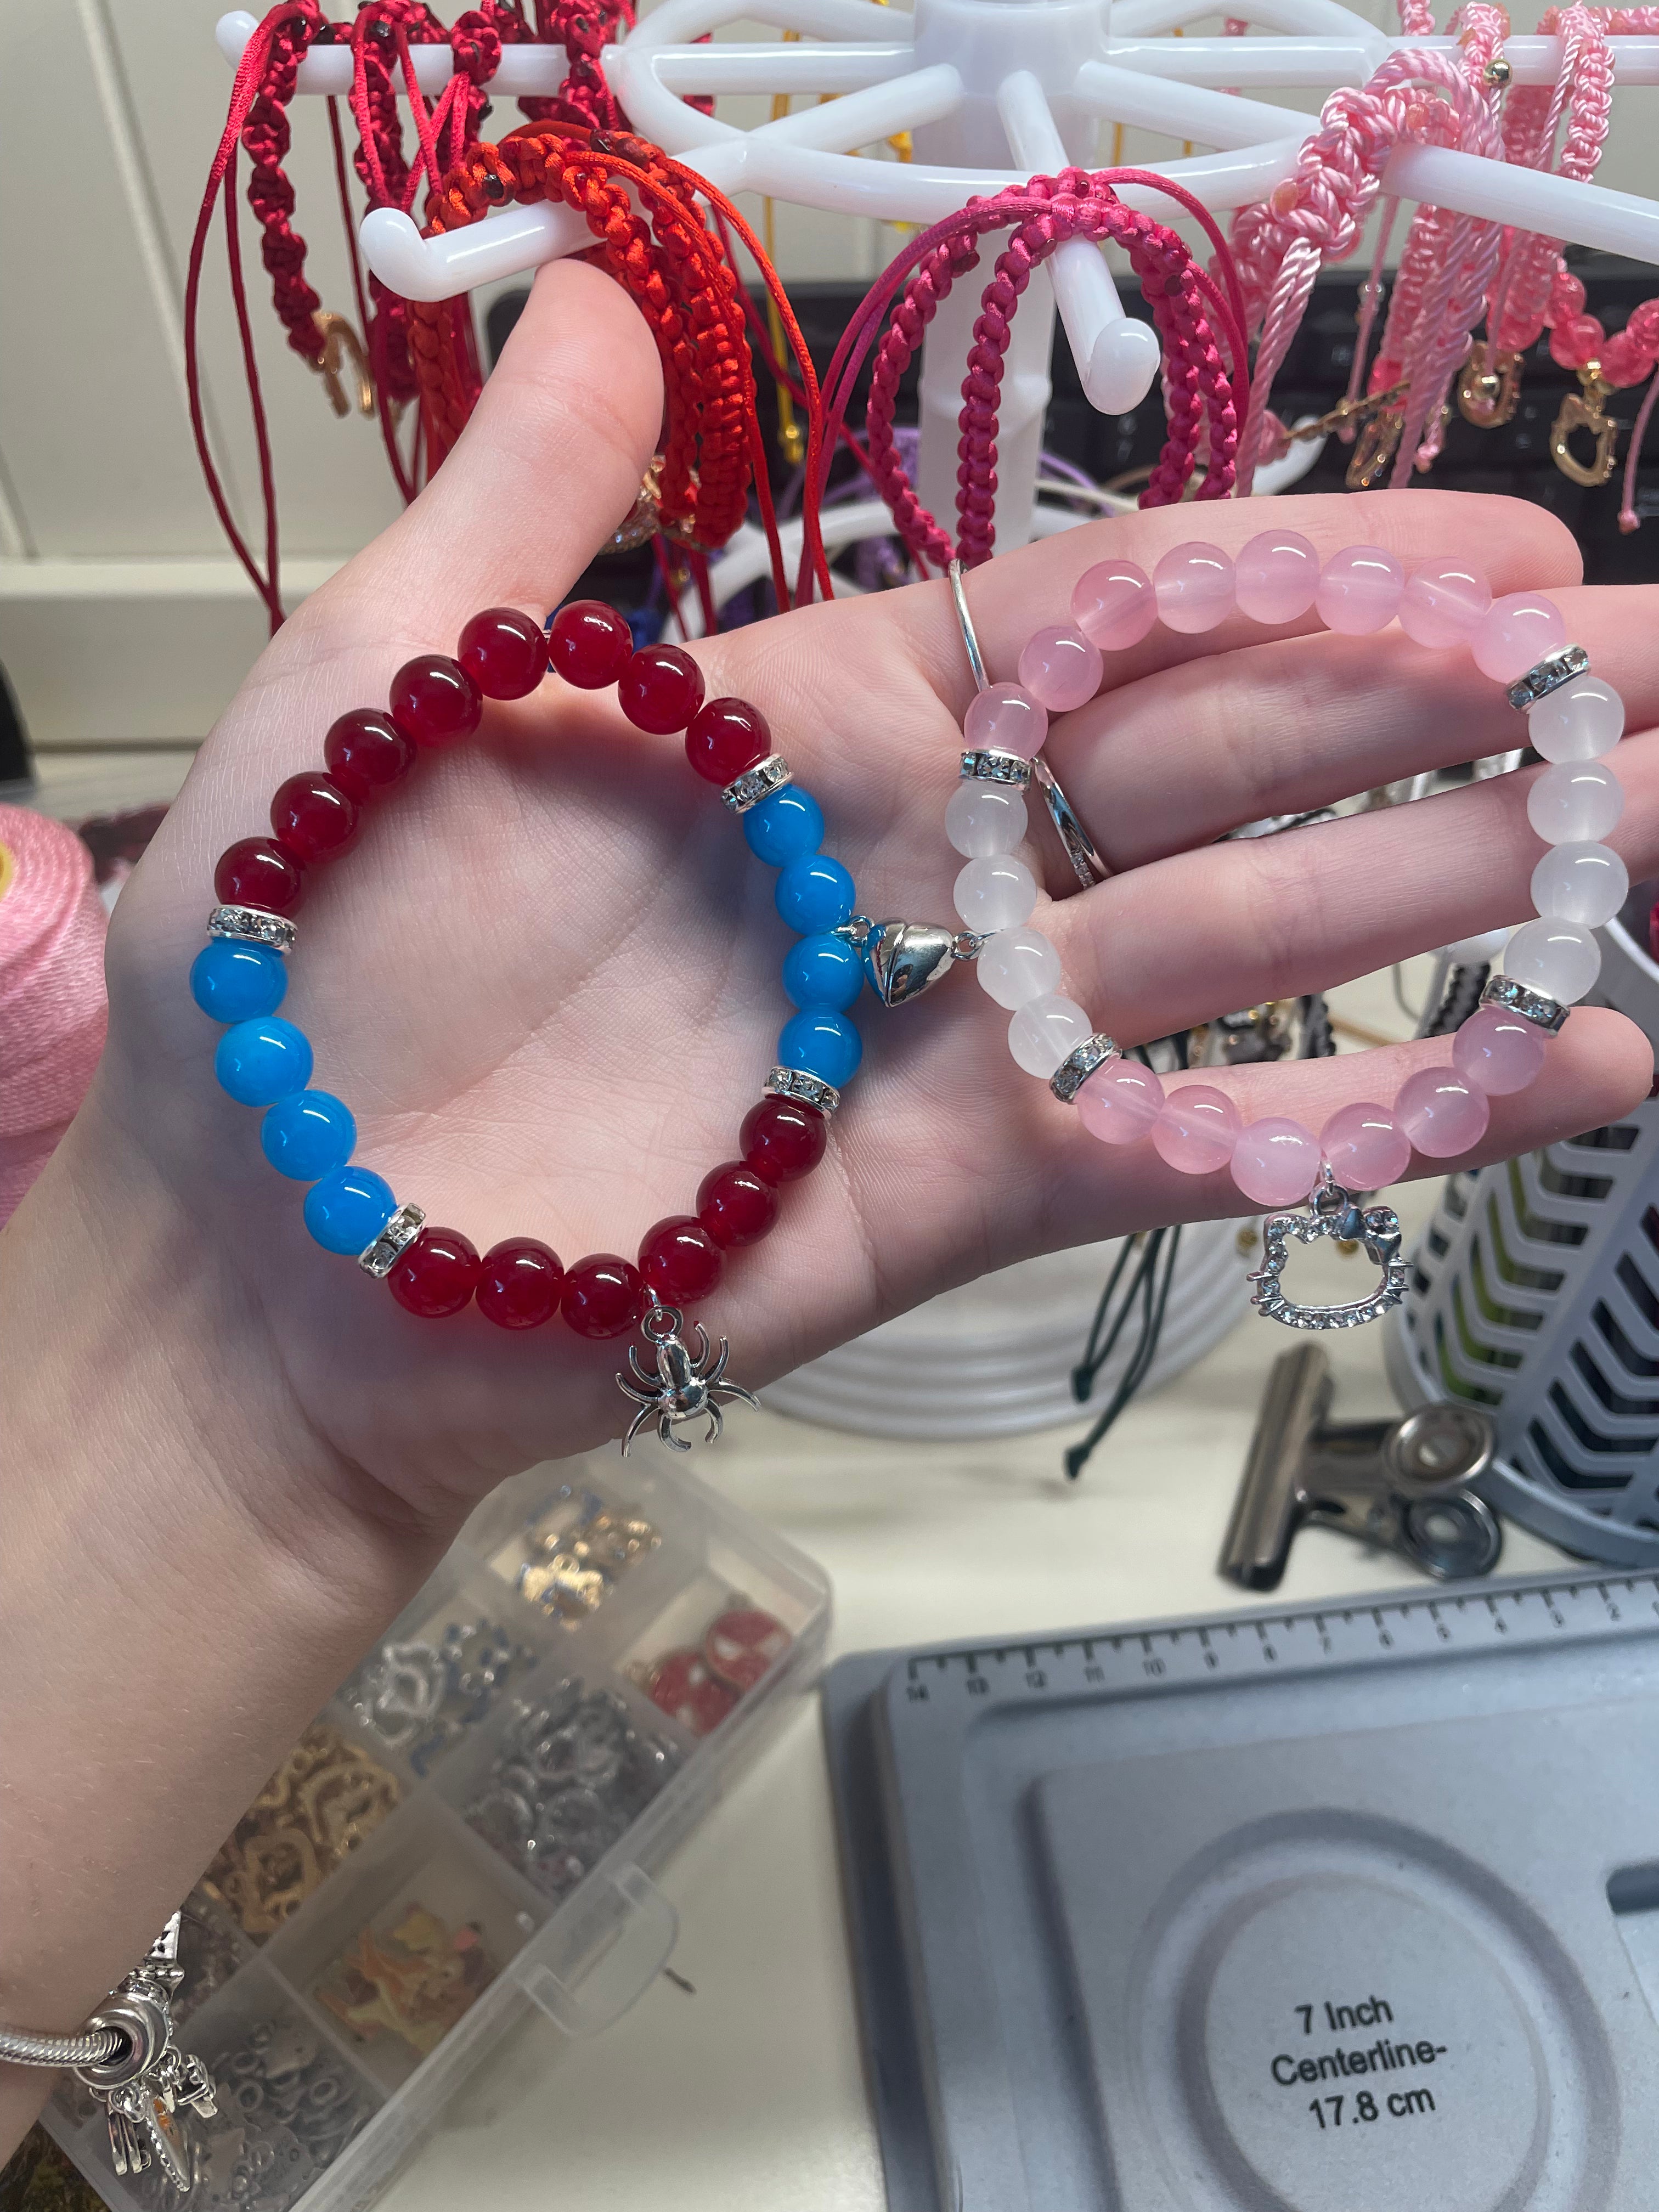 cute matching bracelets 💕 hello kitty and spider man 🕷️ DM me